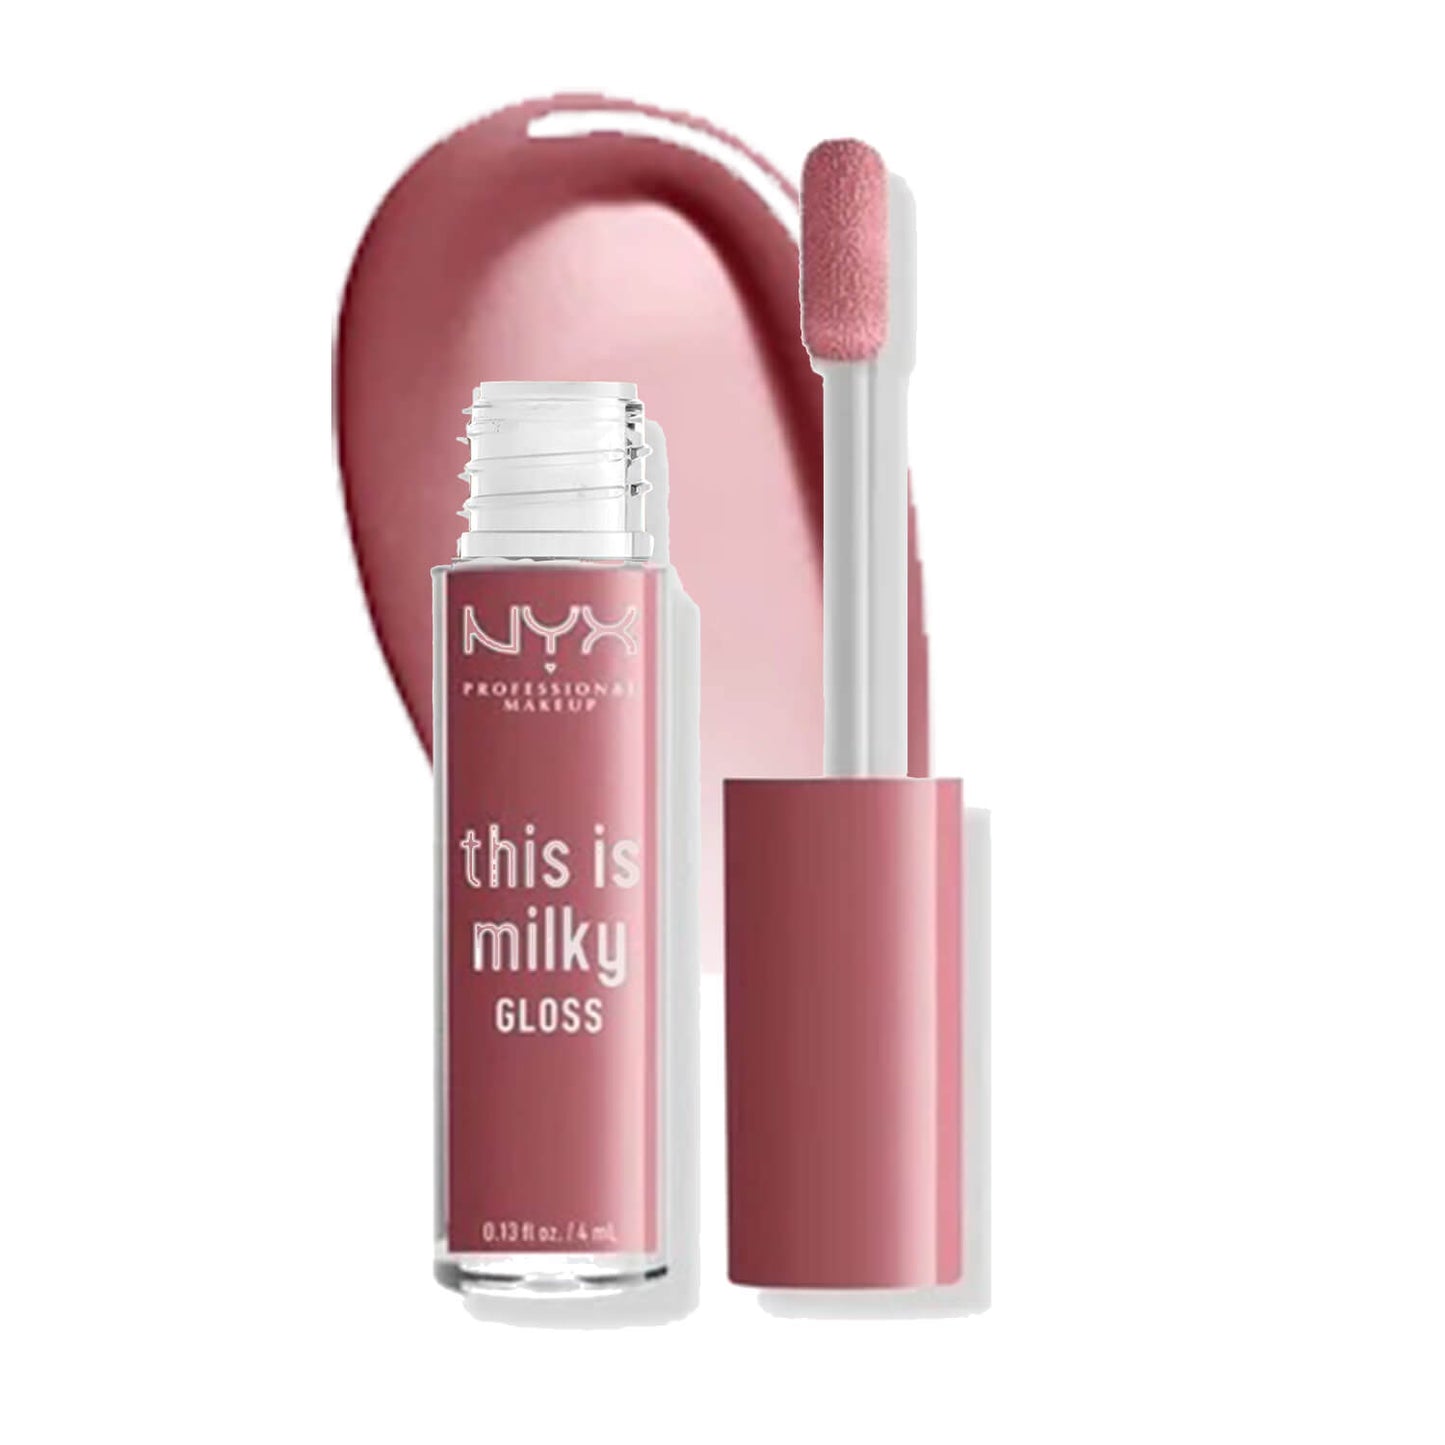 Shop 100% original NYX Lip Gloss in cherry skimmed shade available at Heygirl.pk for delivery in Pakistan. 